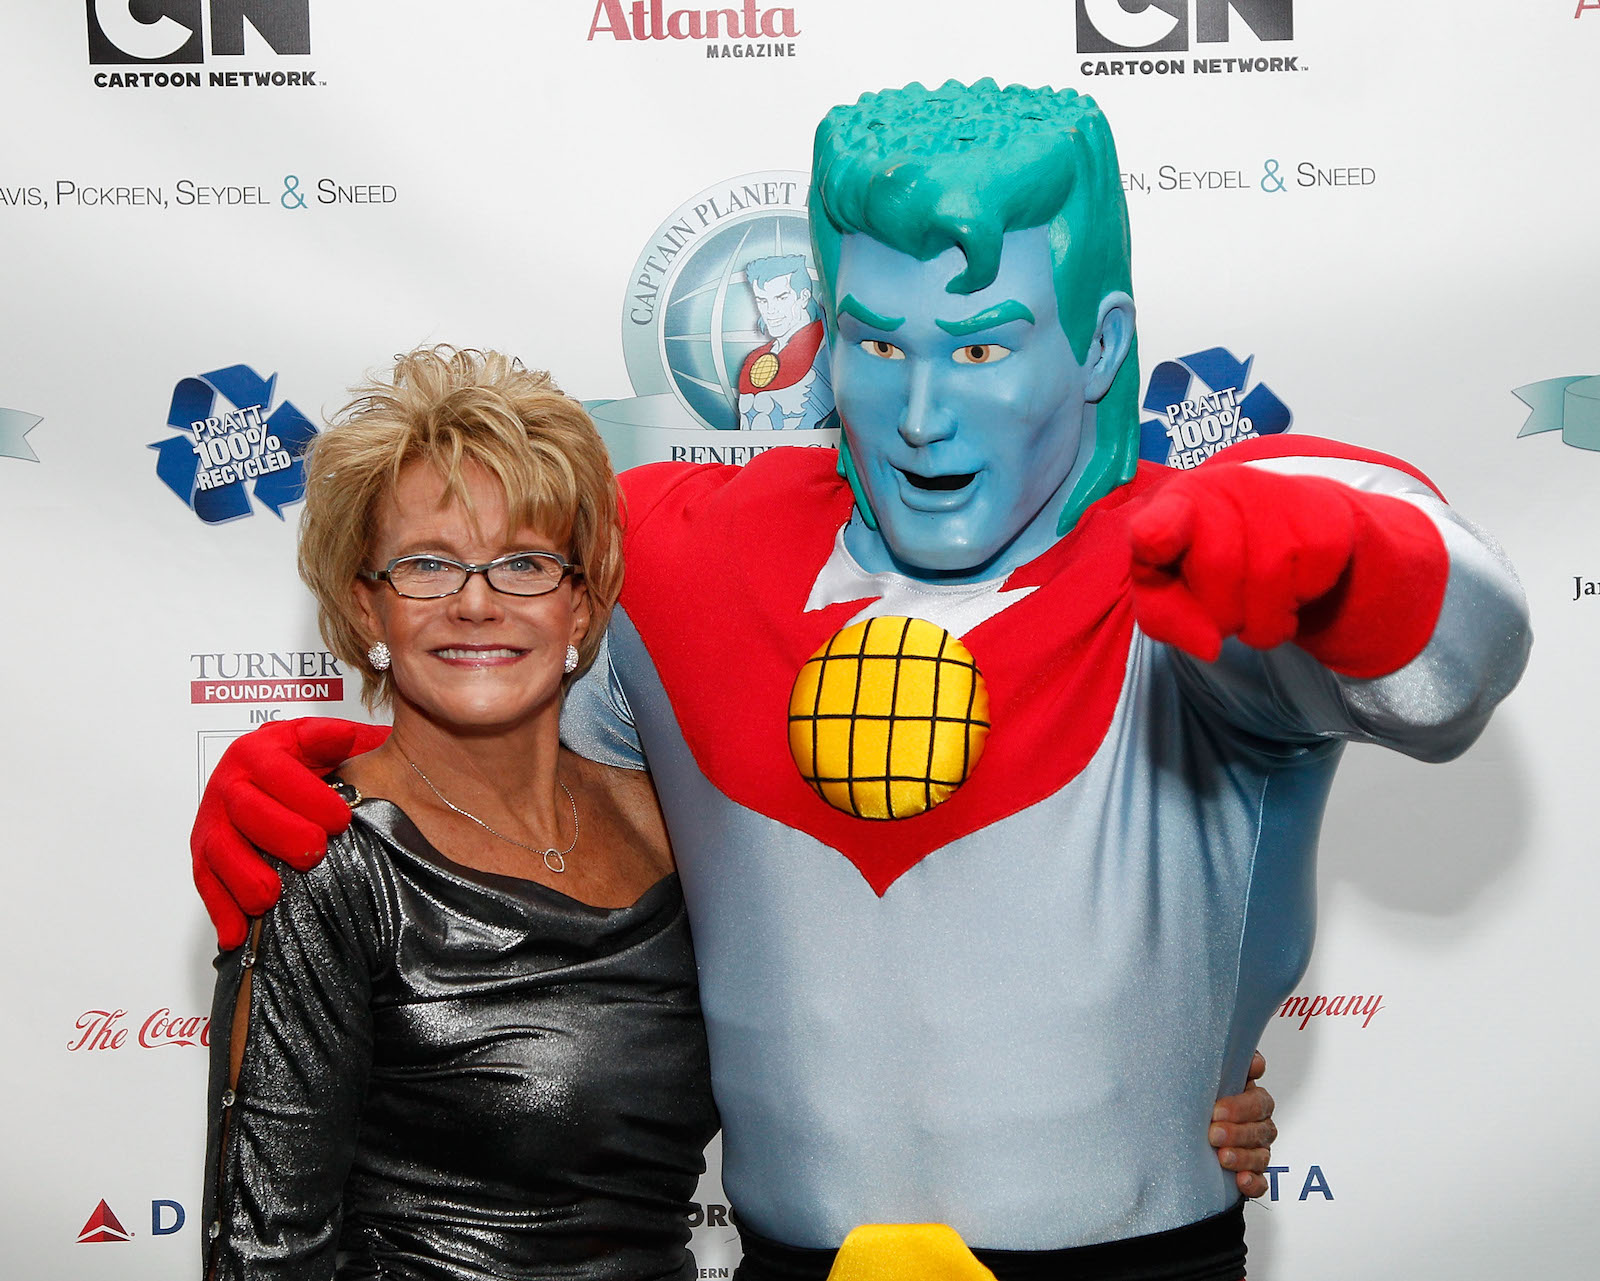 a woman in a sparkly dress on the left, a person in a captain planet costume with green hair, blue skin, and a red half-shirt on the right